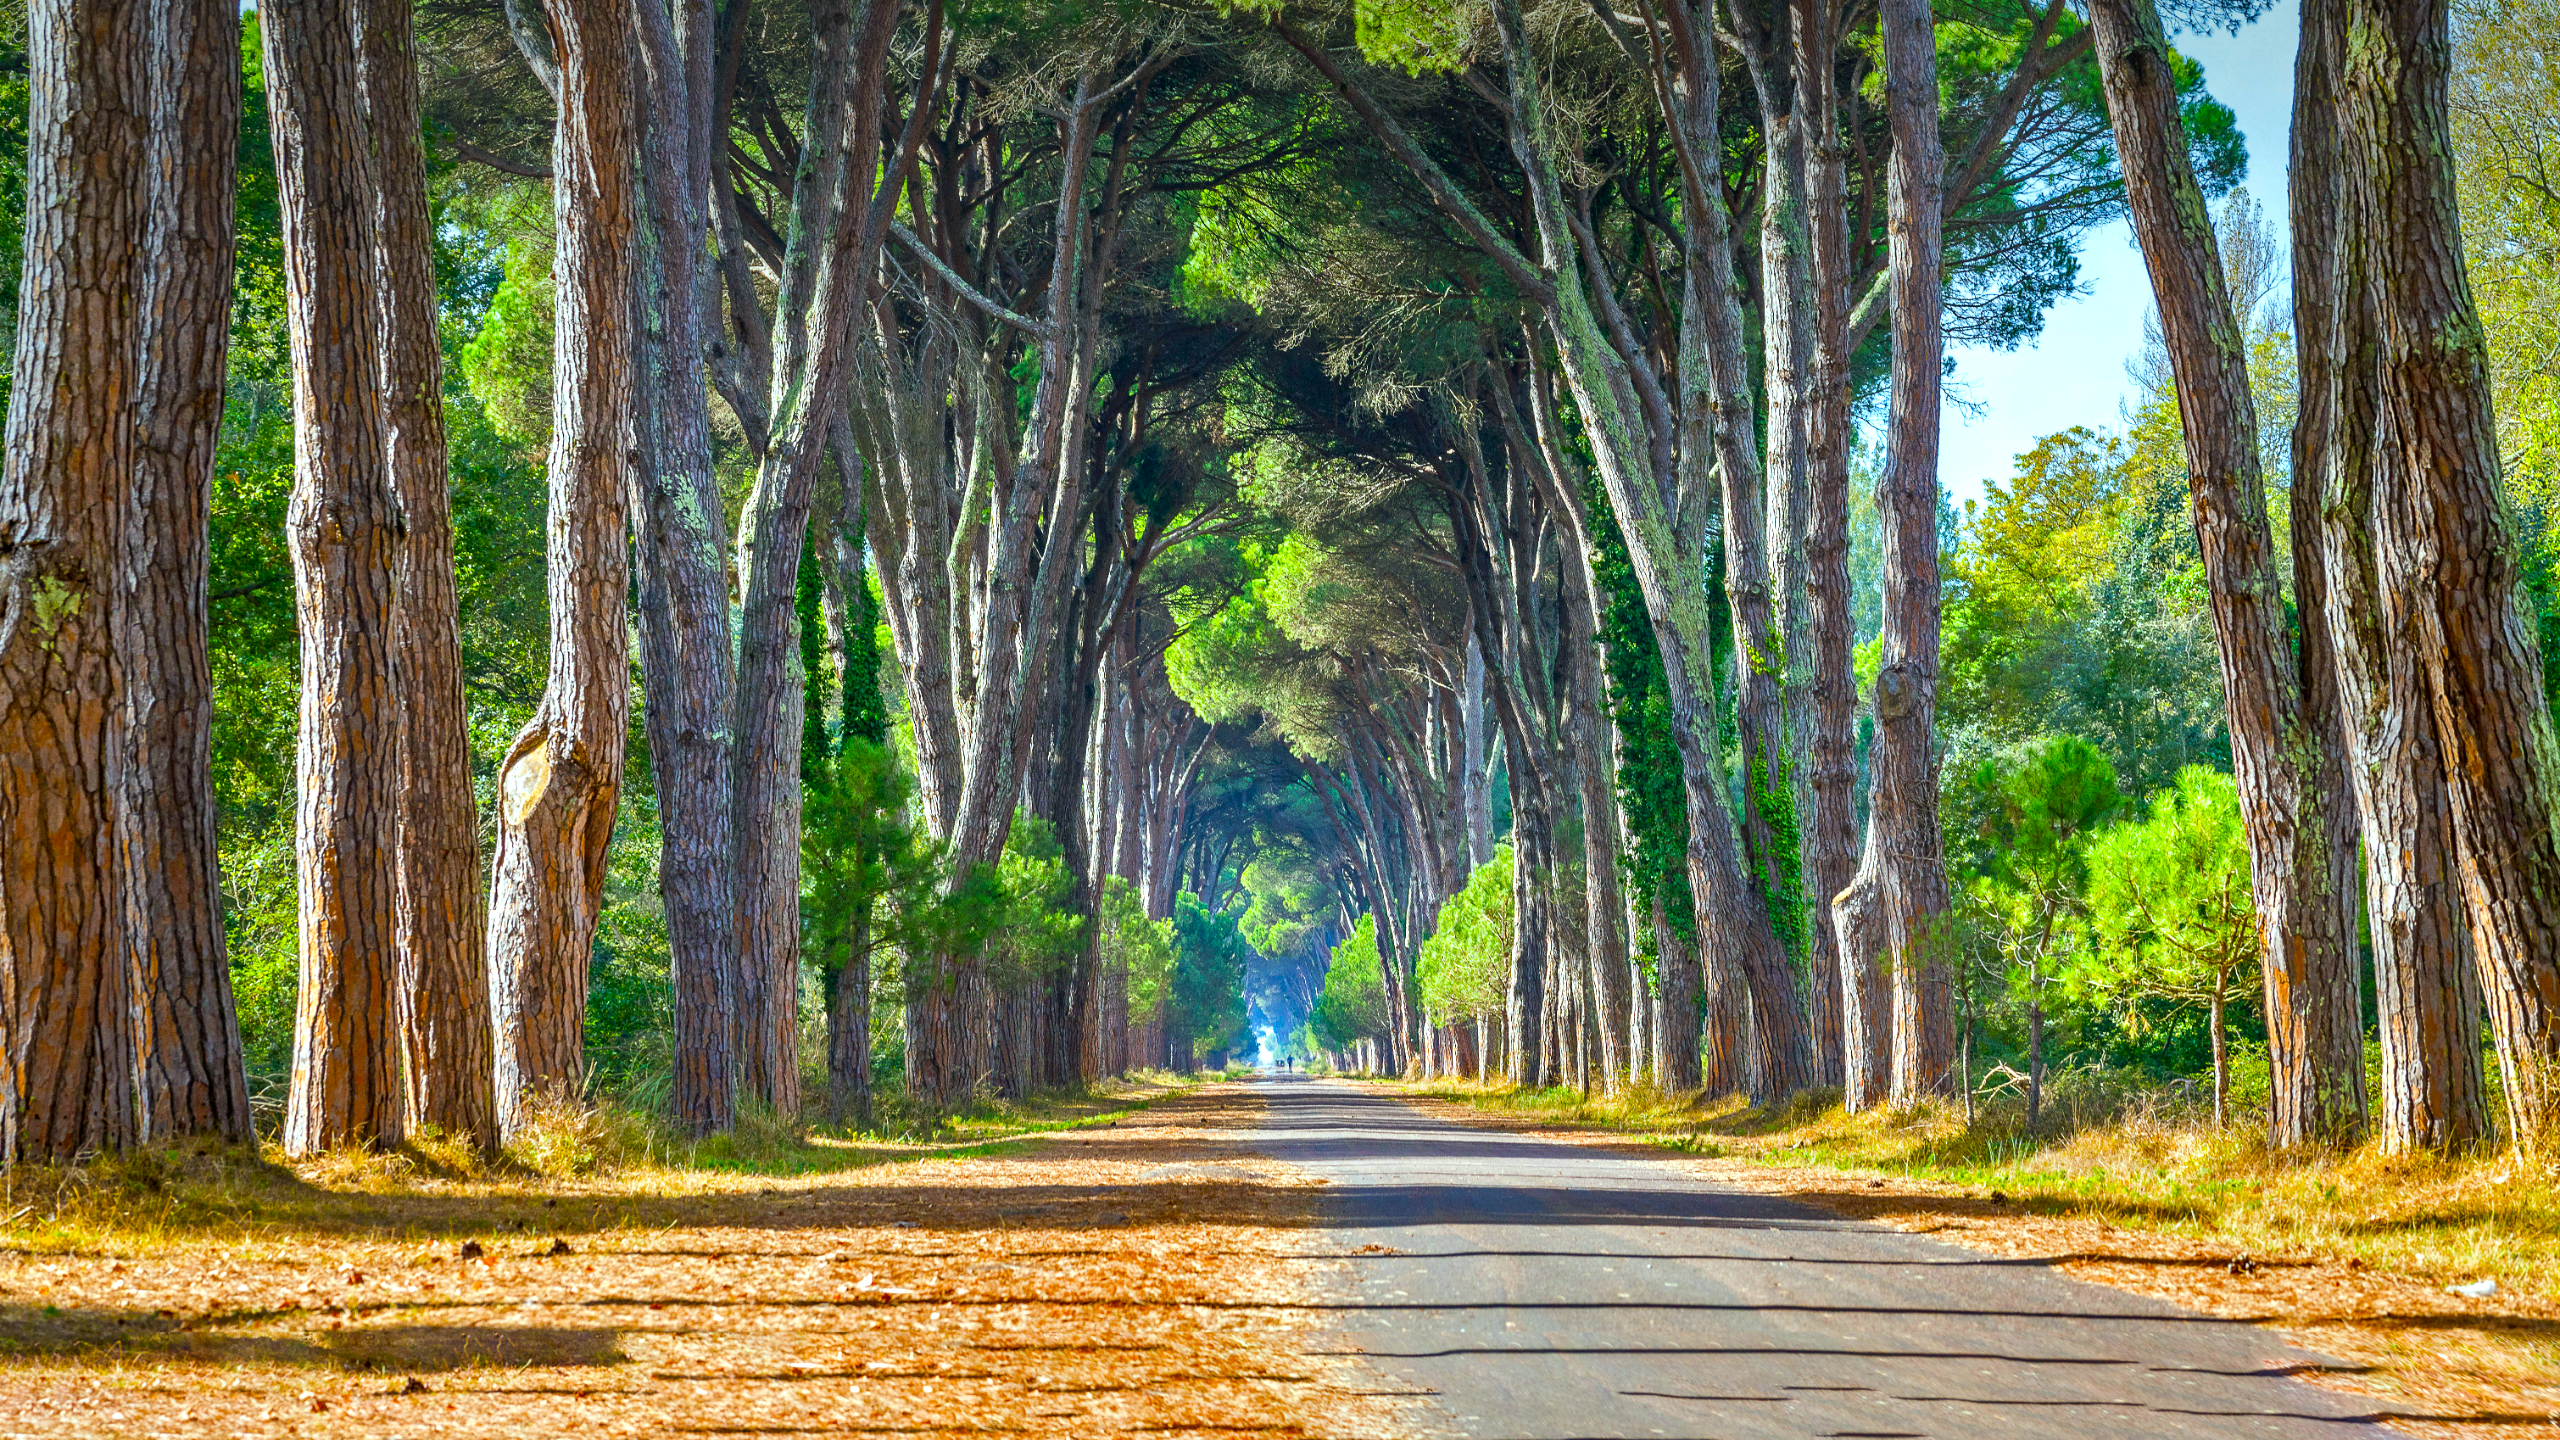 General 2560x1440 nature landscape trees plants leaves road shadow tunnel of trees Italy